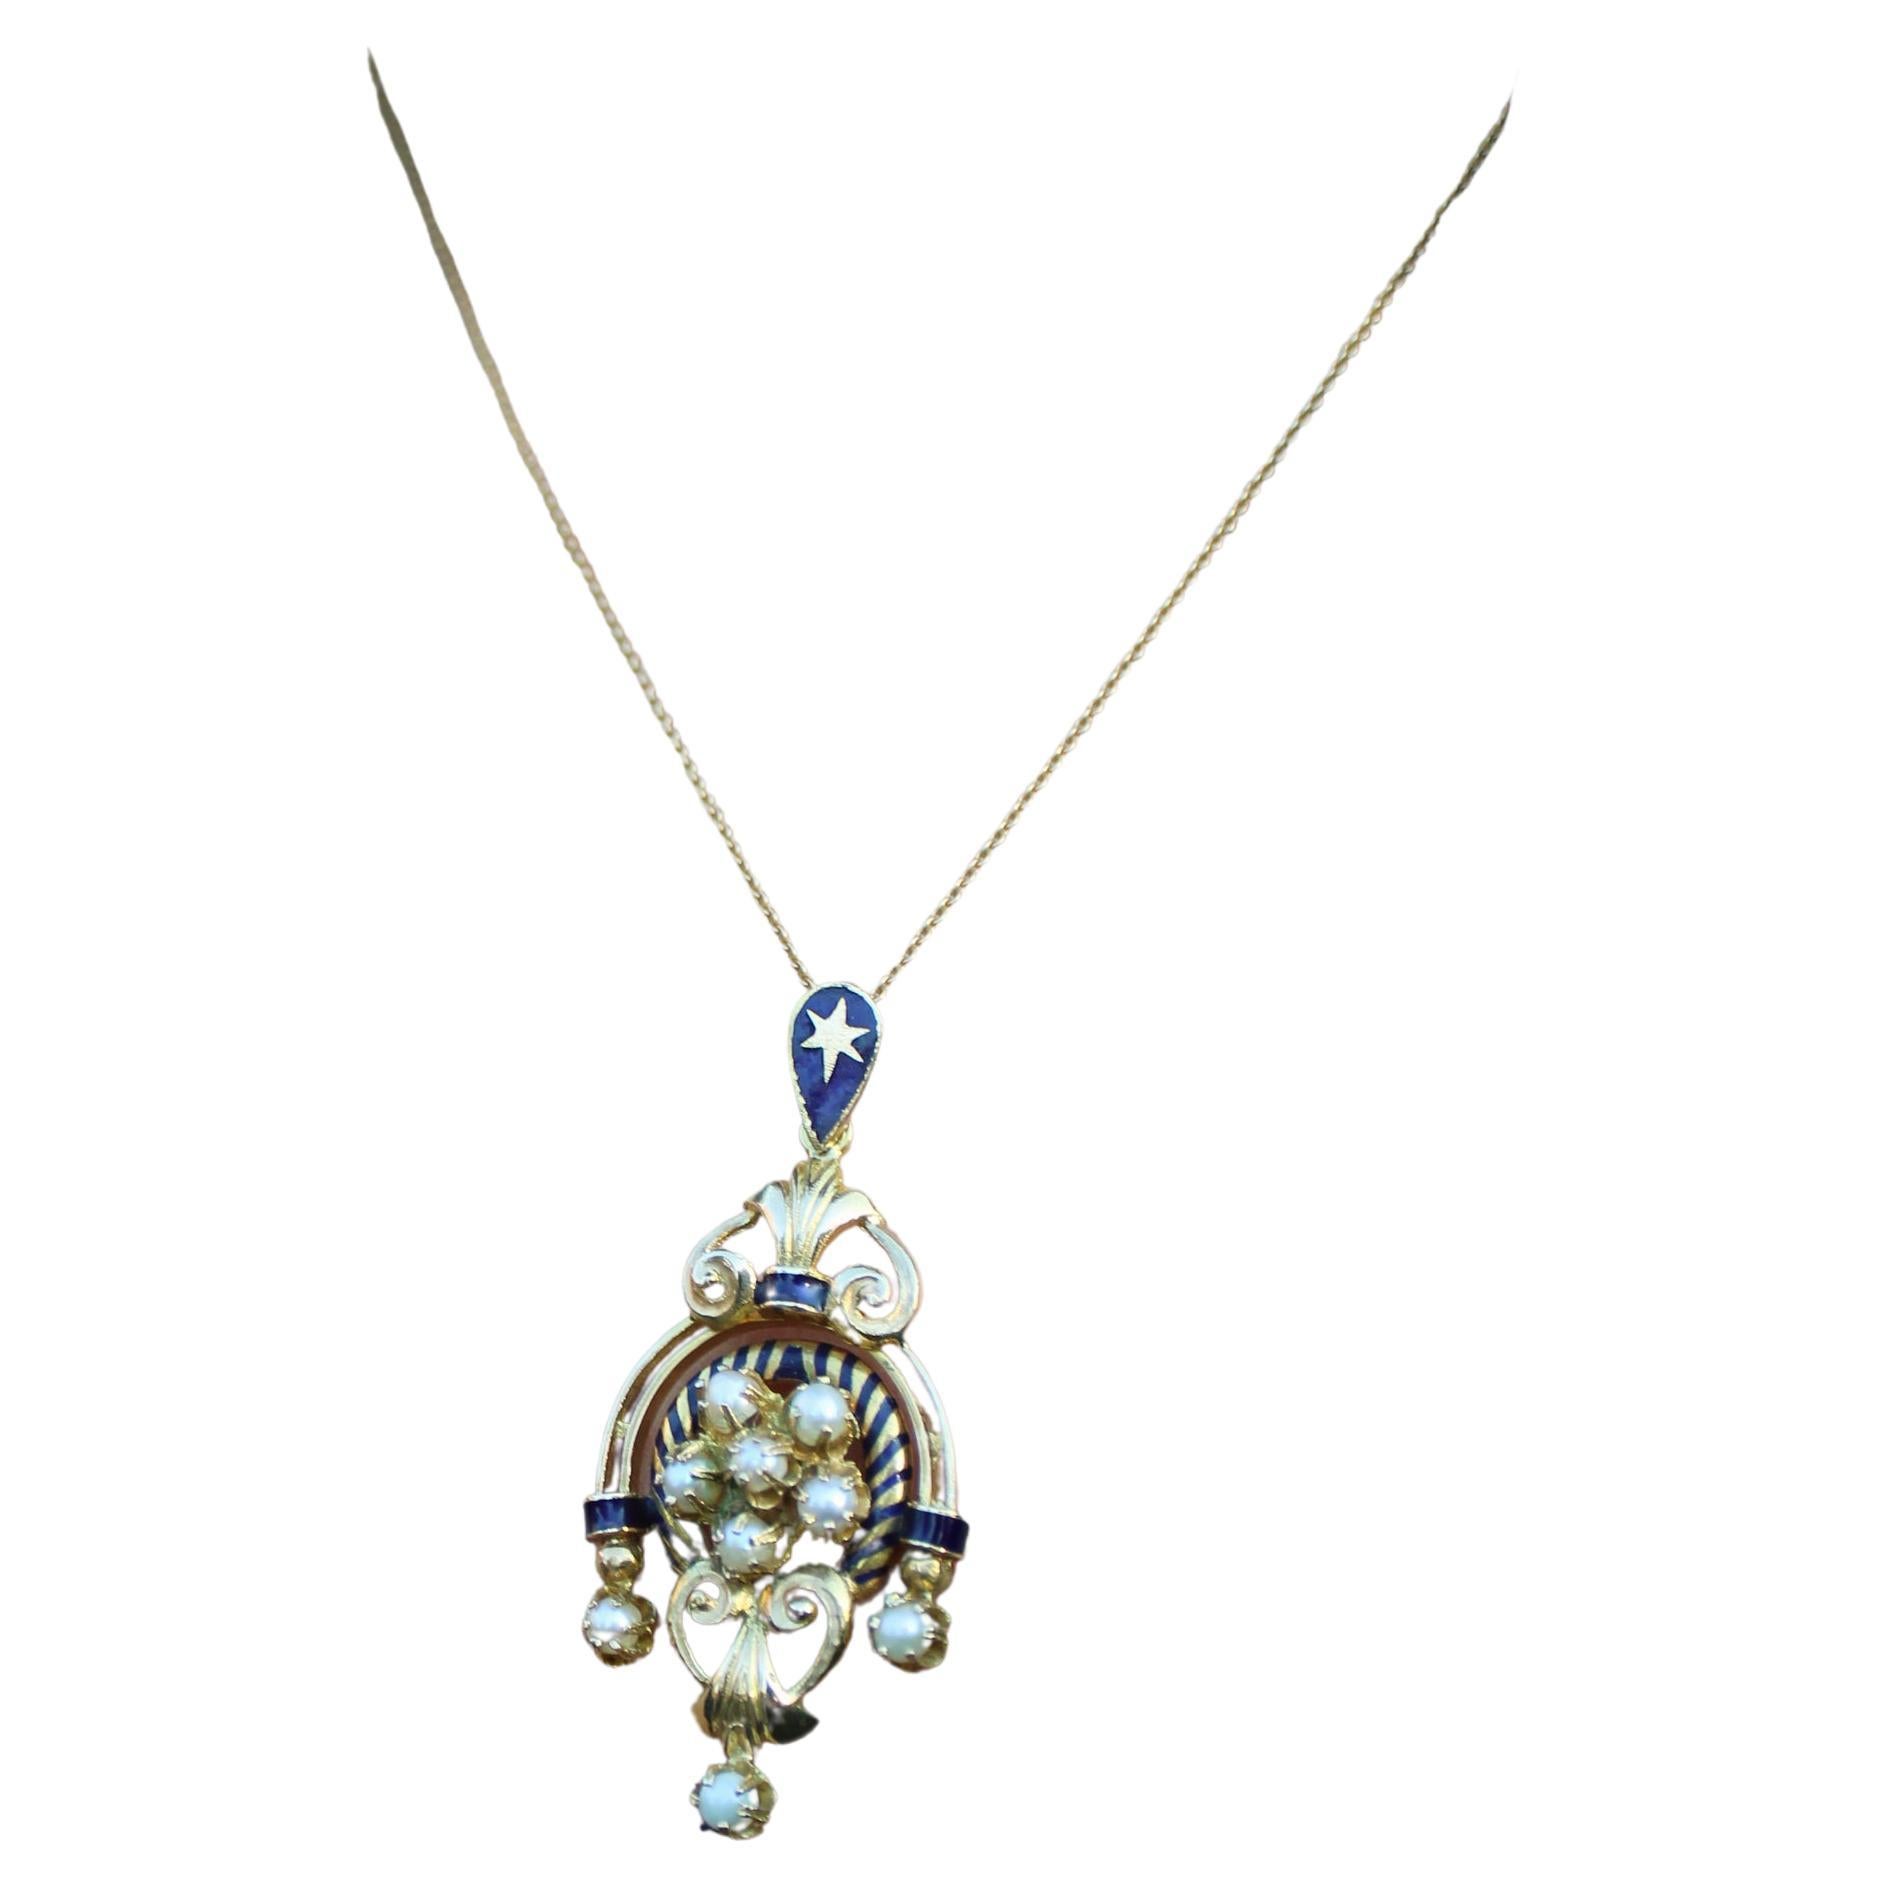 Vintage Continental 14k Gold Enamel Lavalier Pendant with Seed Pearls